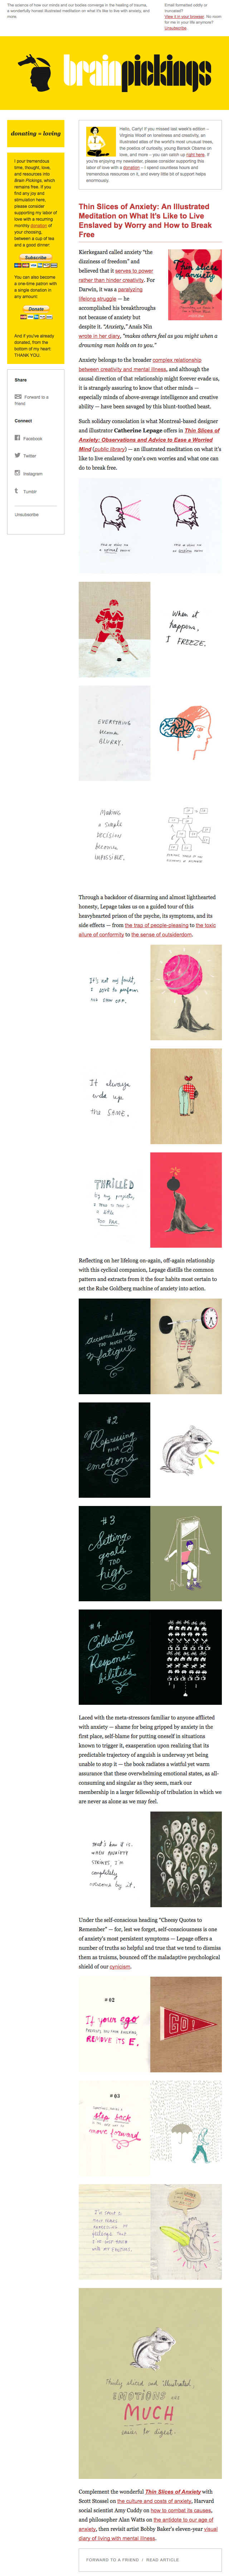 Email newsletter example design with links, clips, and images by BrainPickings